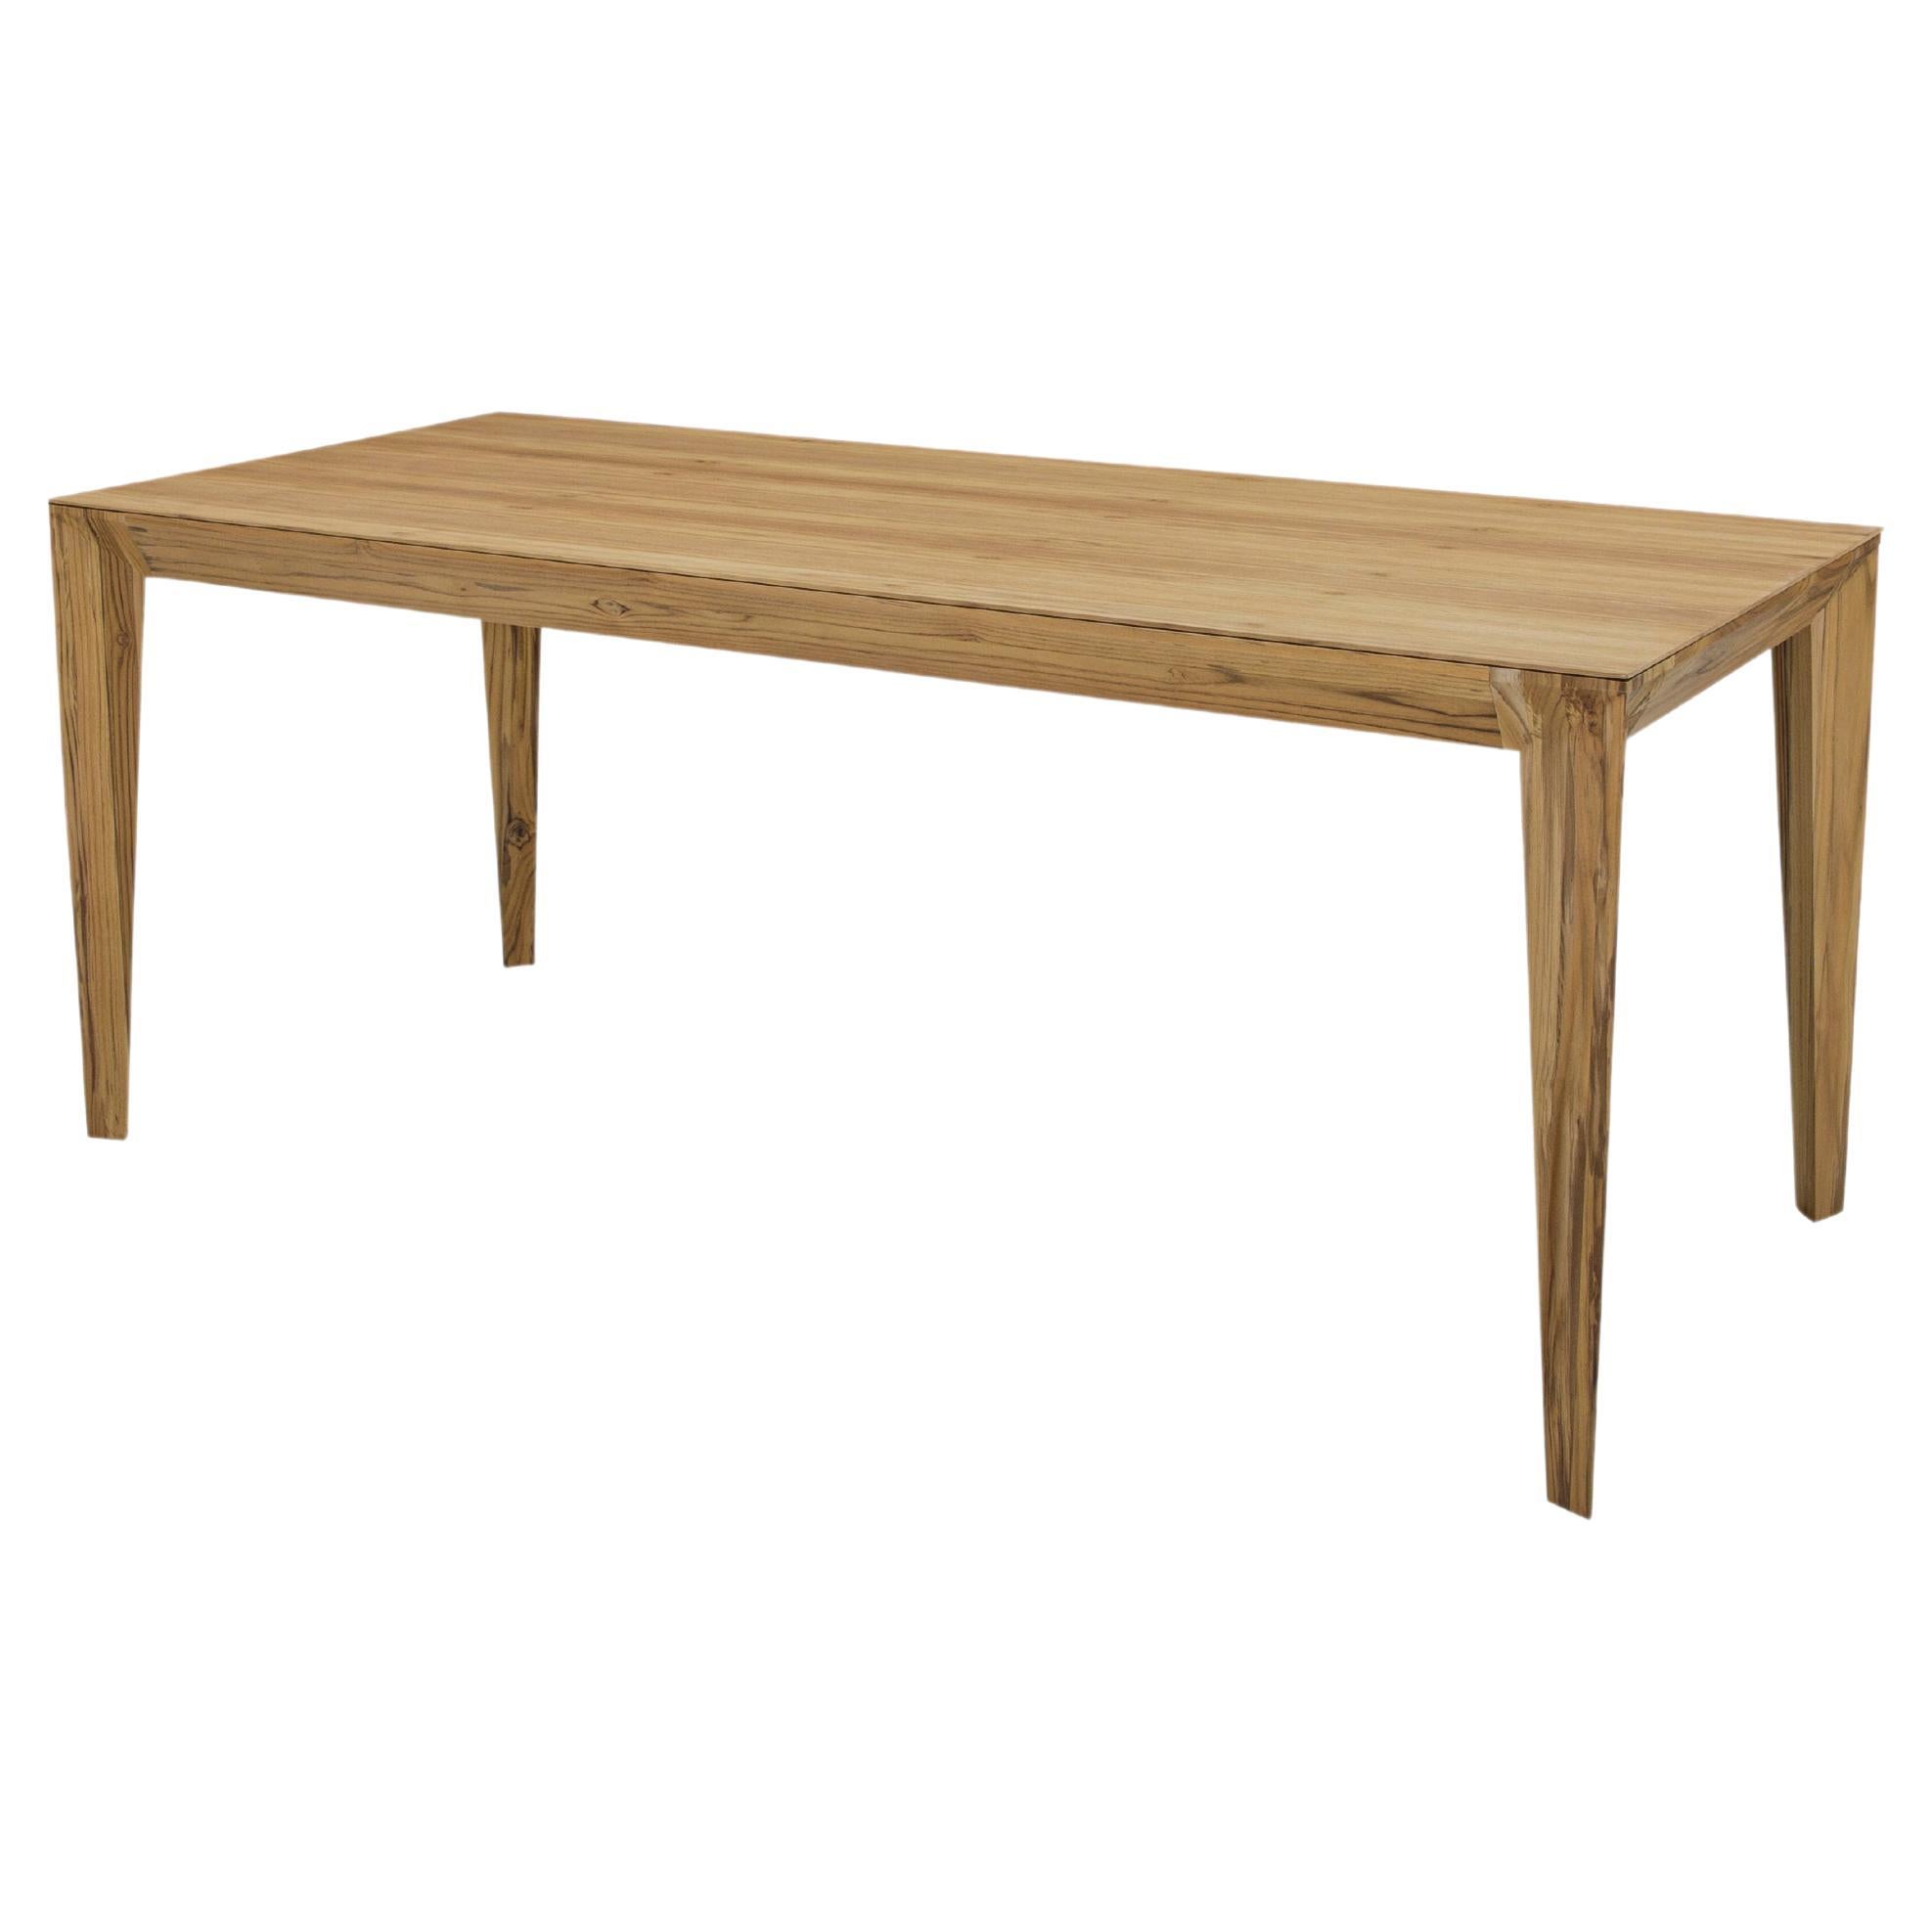 Luce Rectangular Dining Table with a Teak Wood Finish Veneered Table Top 95'' For Sale